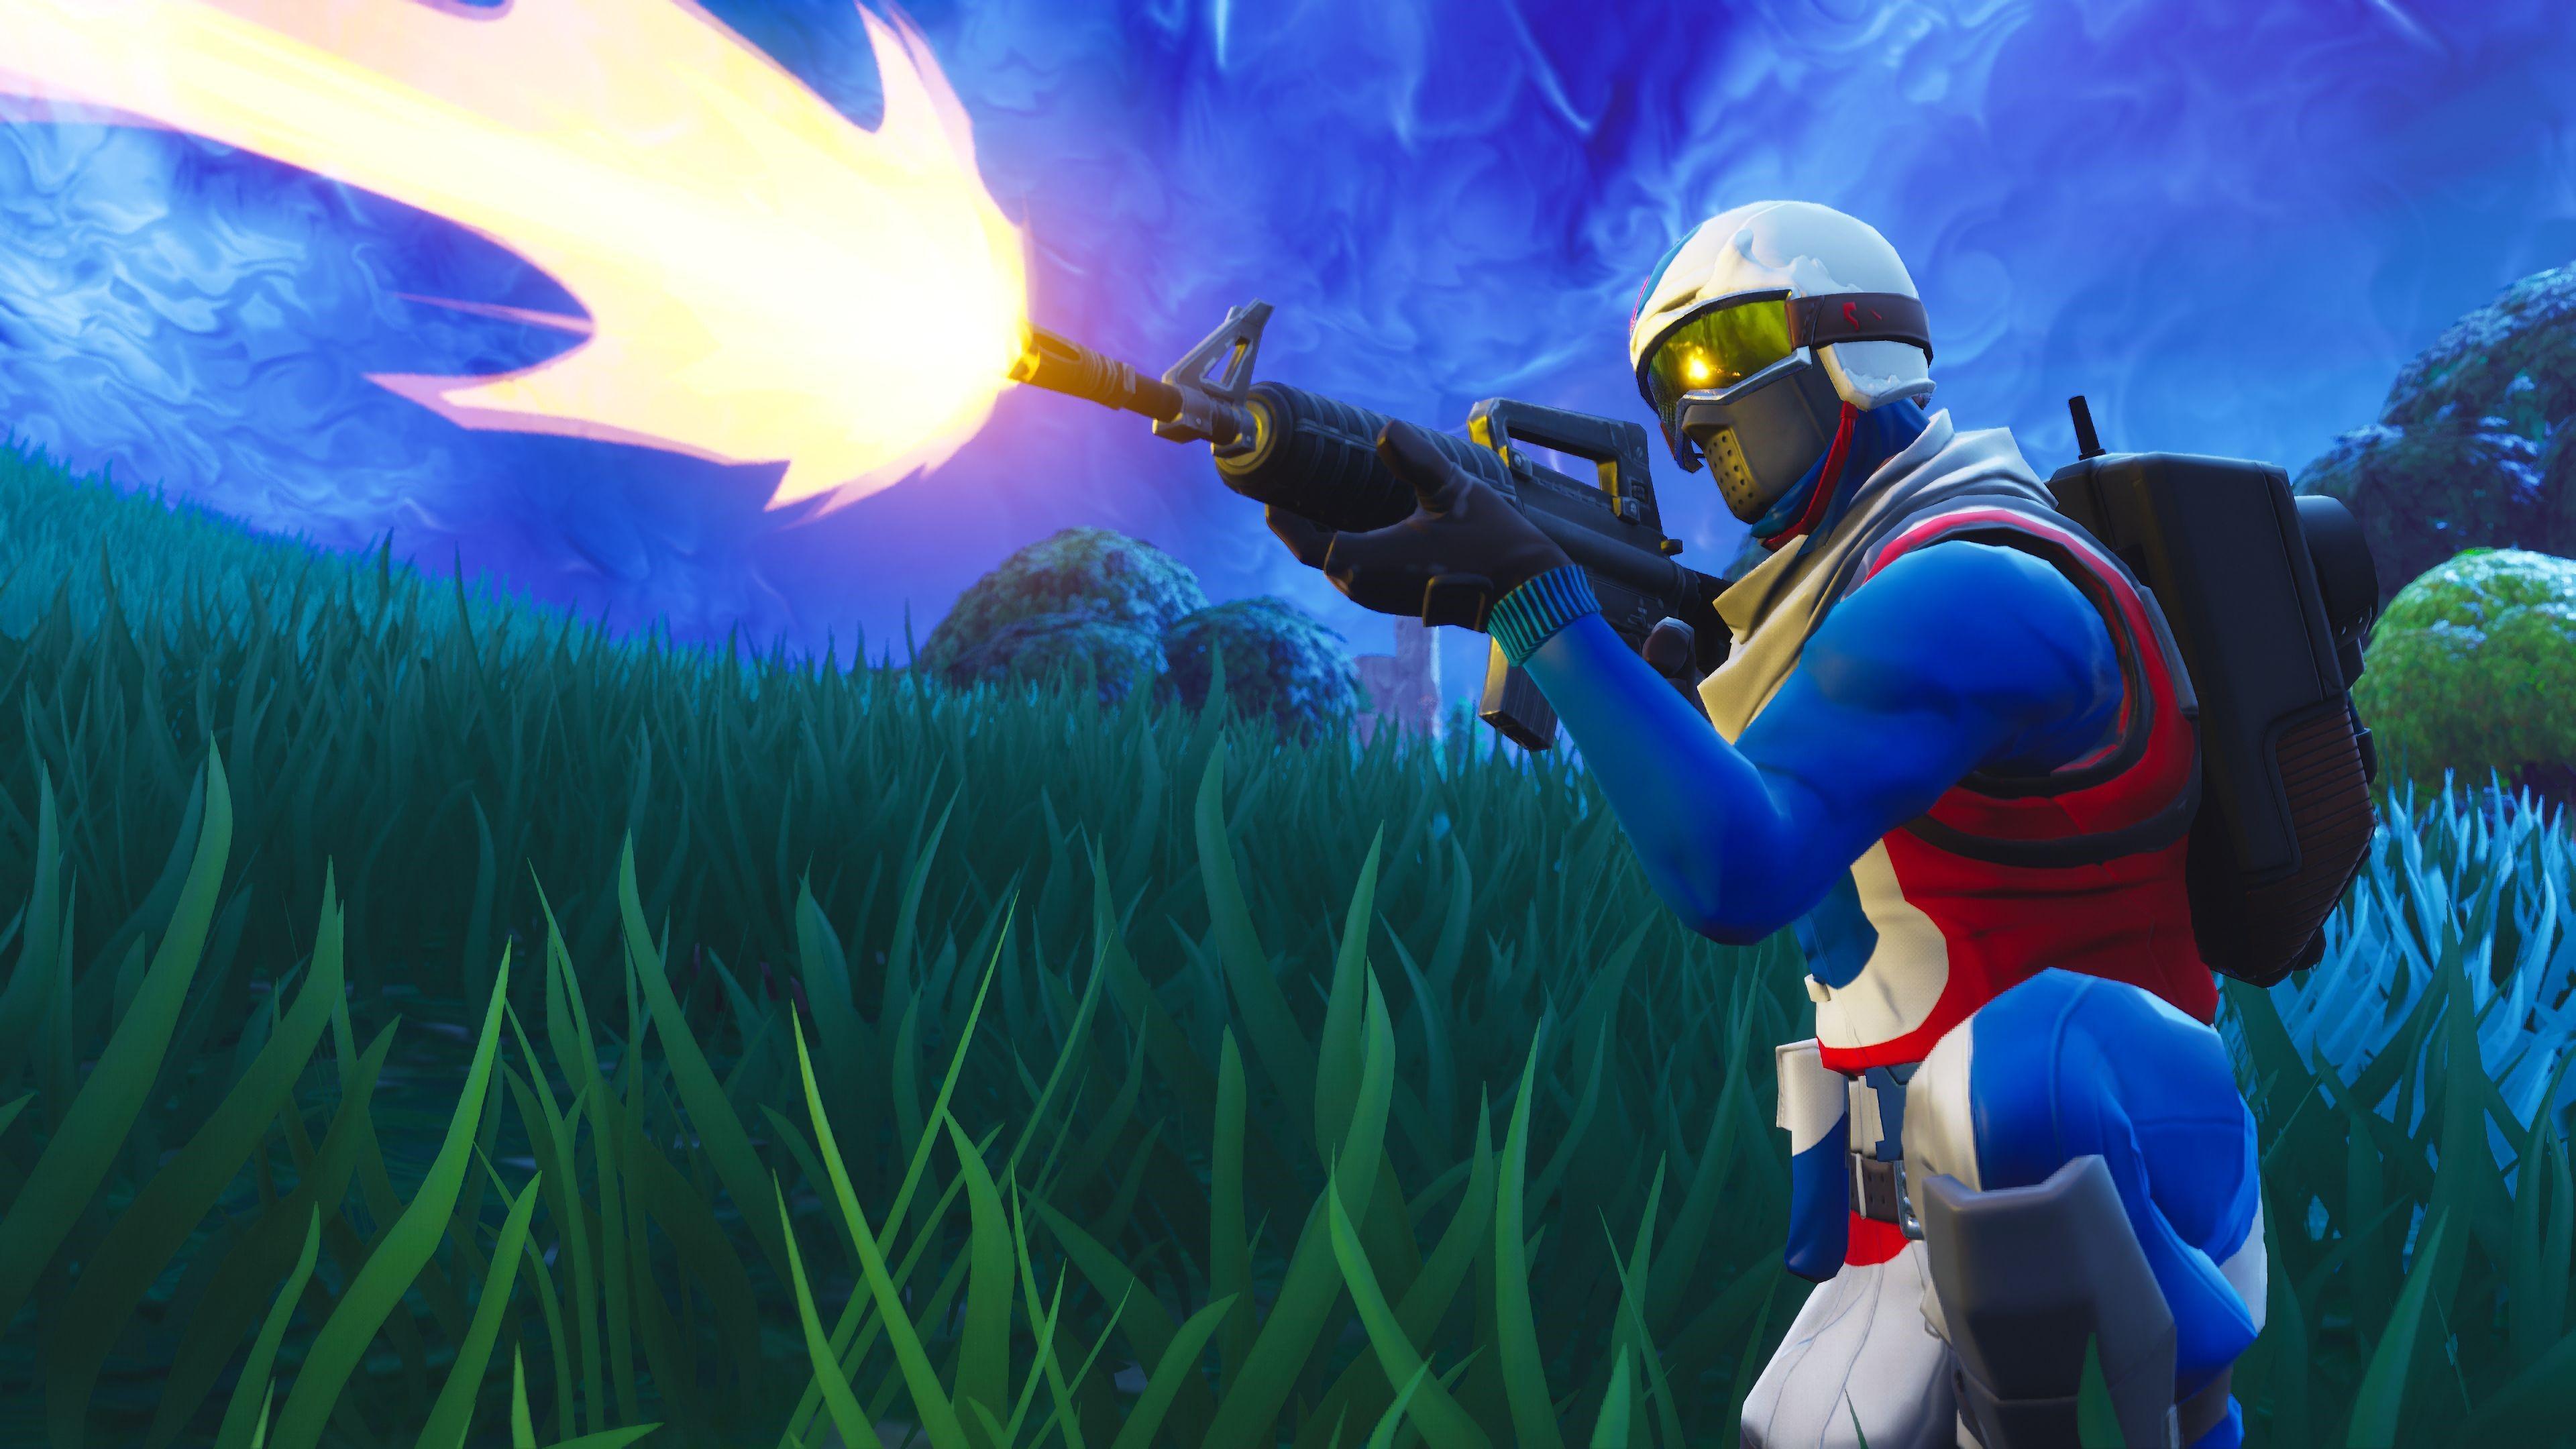 3840 x 2160 · jpeg - Fortnite Weapons Wallpapers - Wallpaper Cave